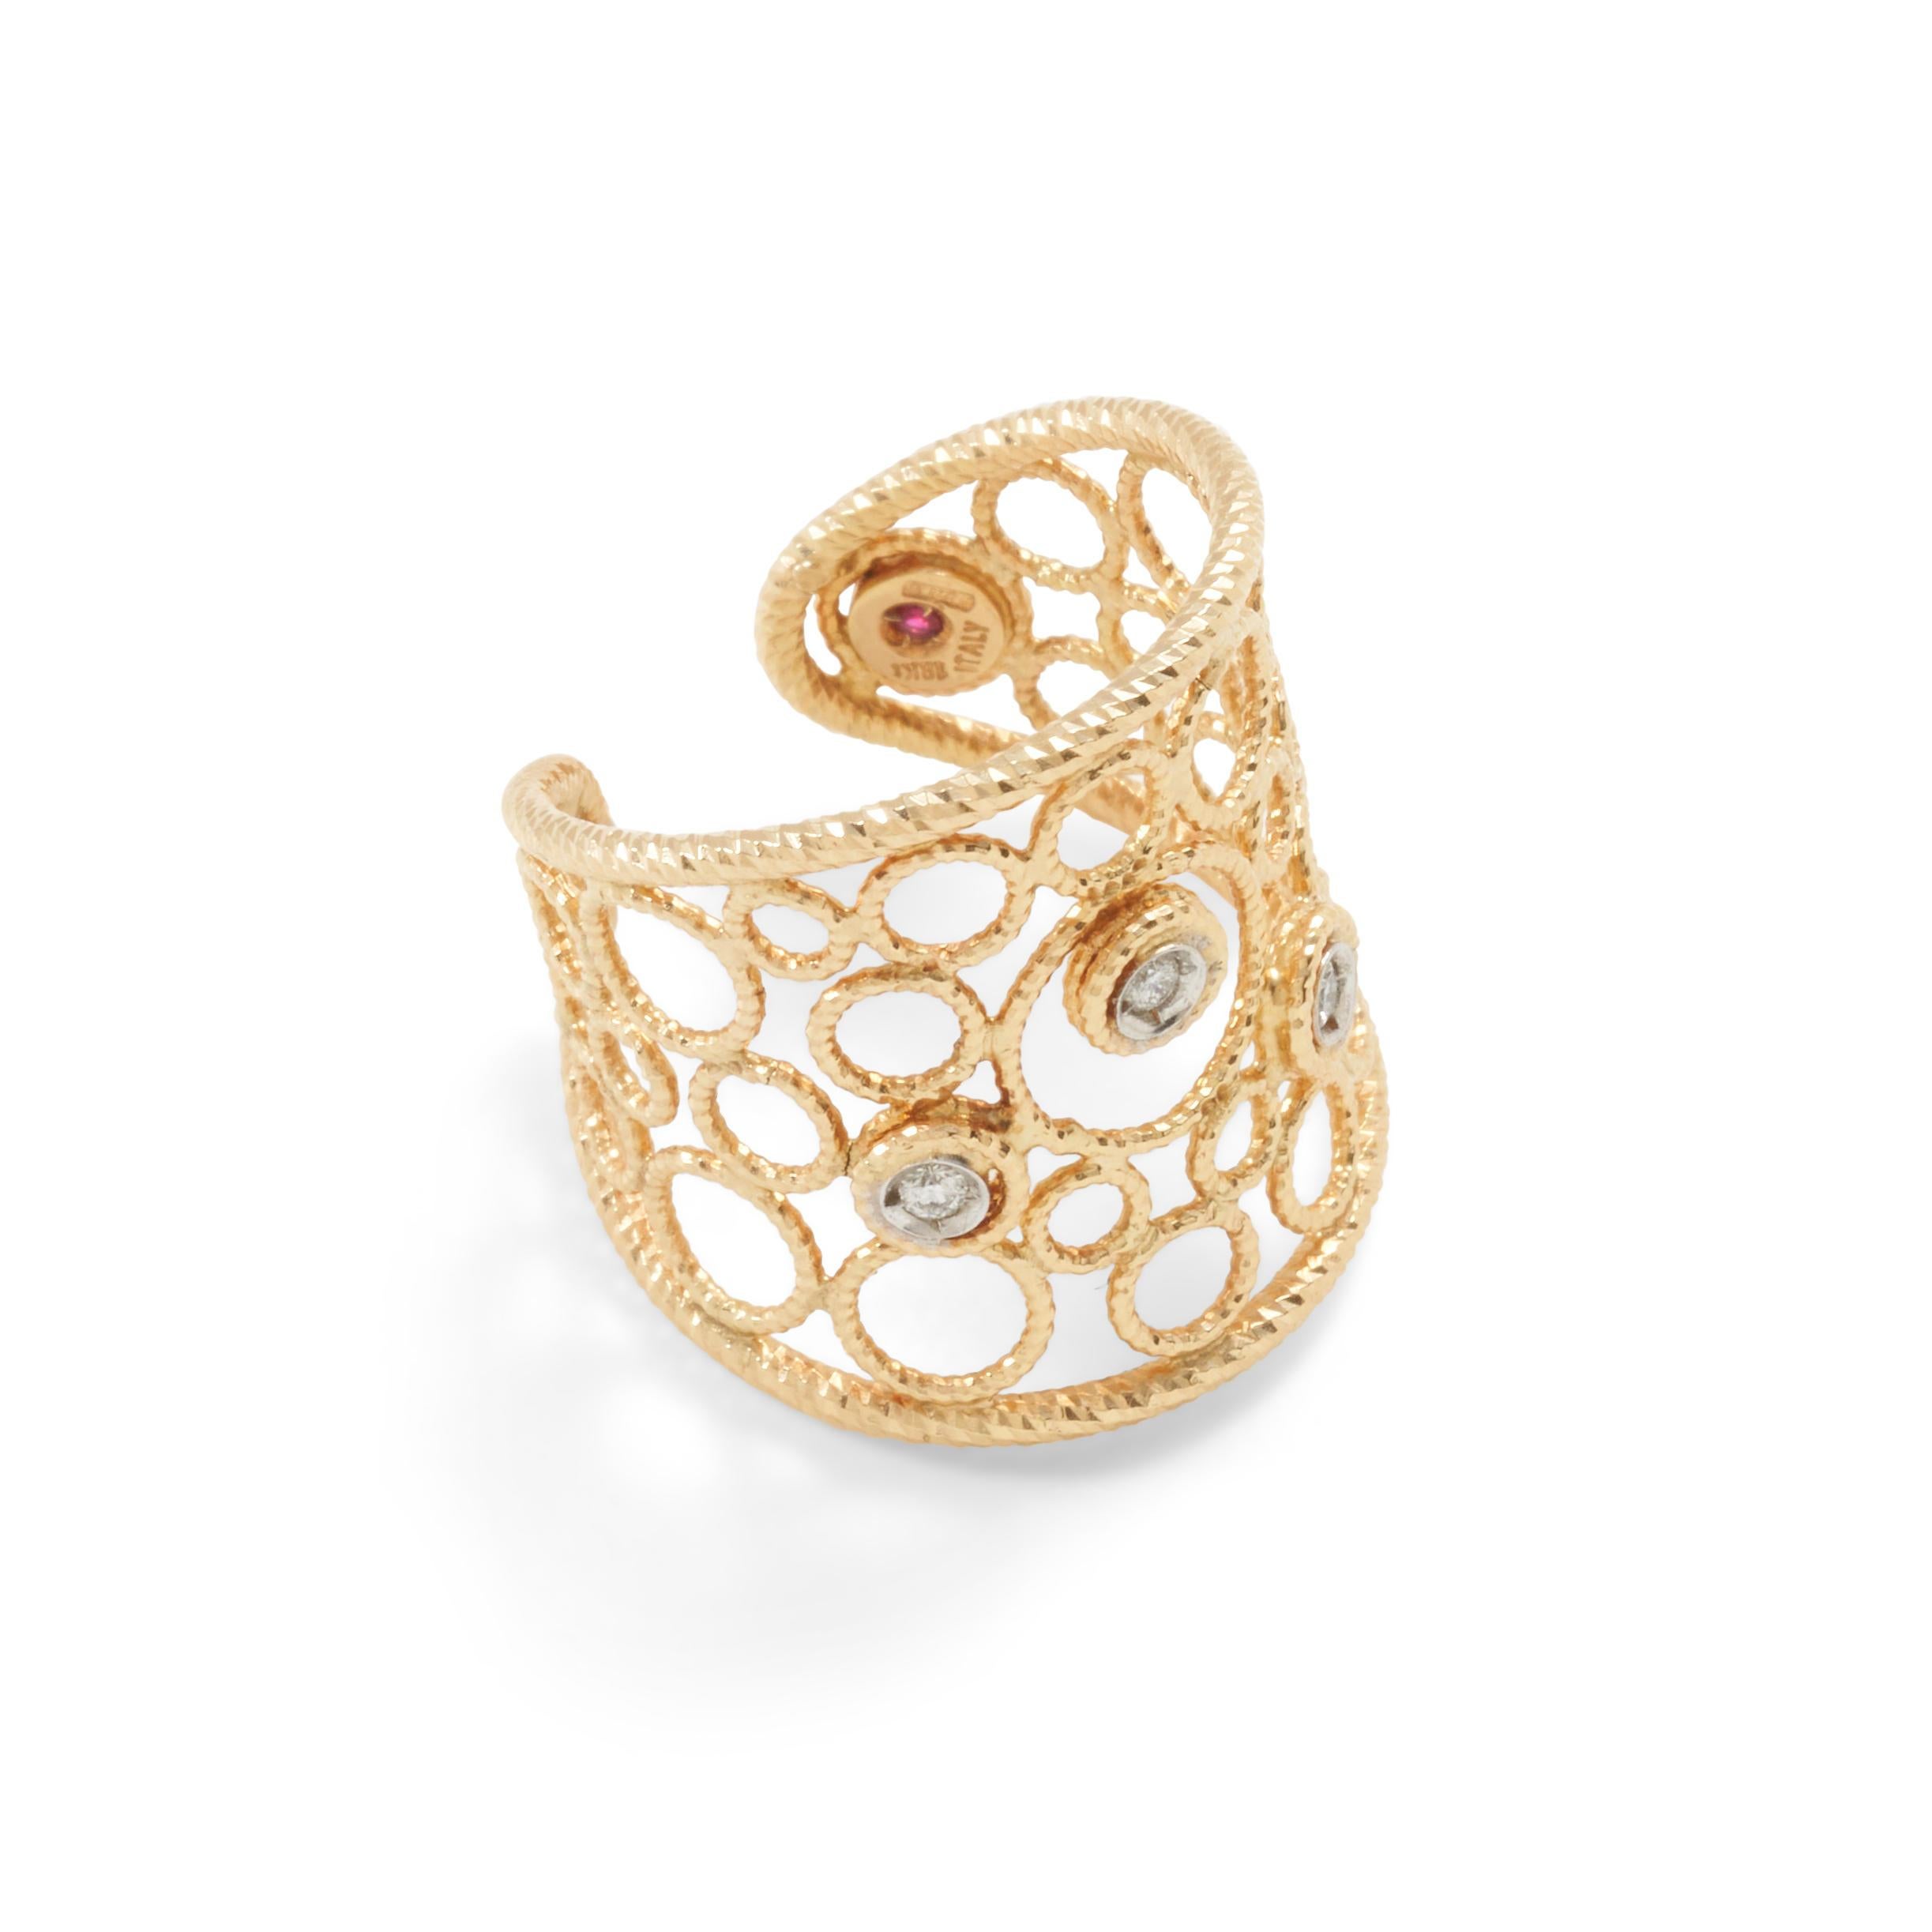 This Roberto Coin Bollicine ring is designed as a cuff ring with three full cut diamonds set in 18K yellow gold. Signed with Roberto Coin Ruby Signature. 
Size 7.5. The Ring is flexible so it could be enlarged or tightened.  

